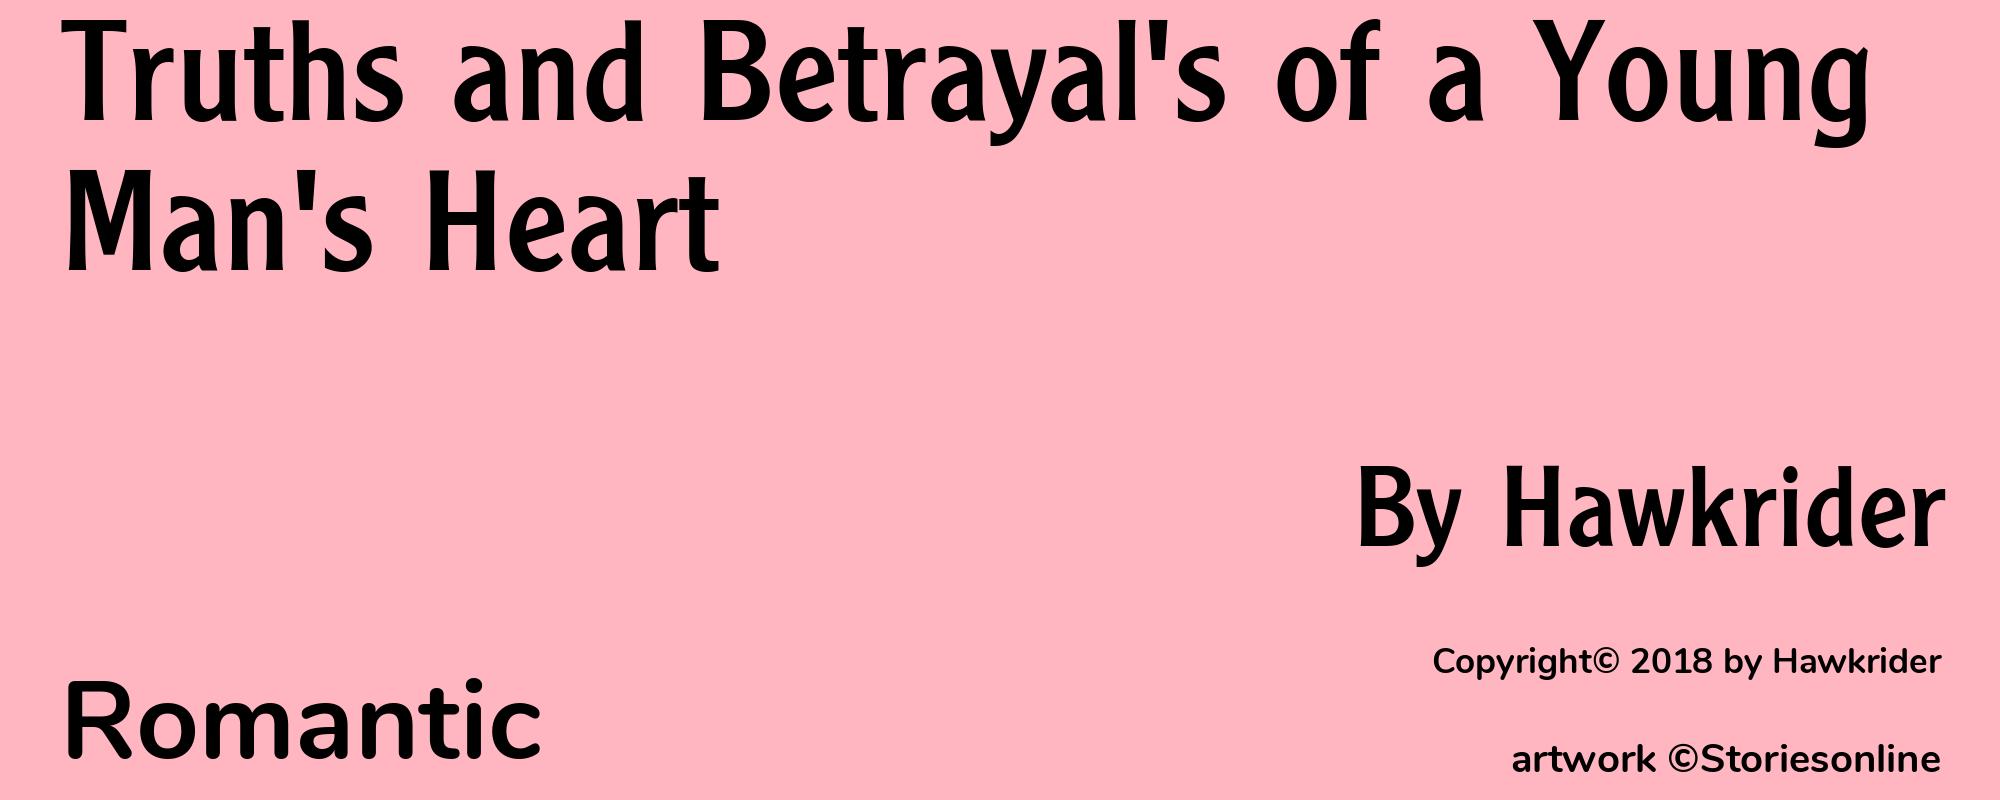 Truths and Betrayal's of a Young Man's Heart - Cover